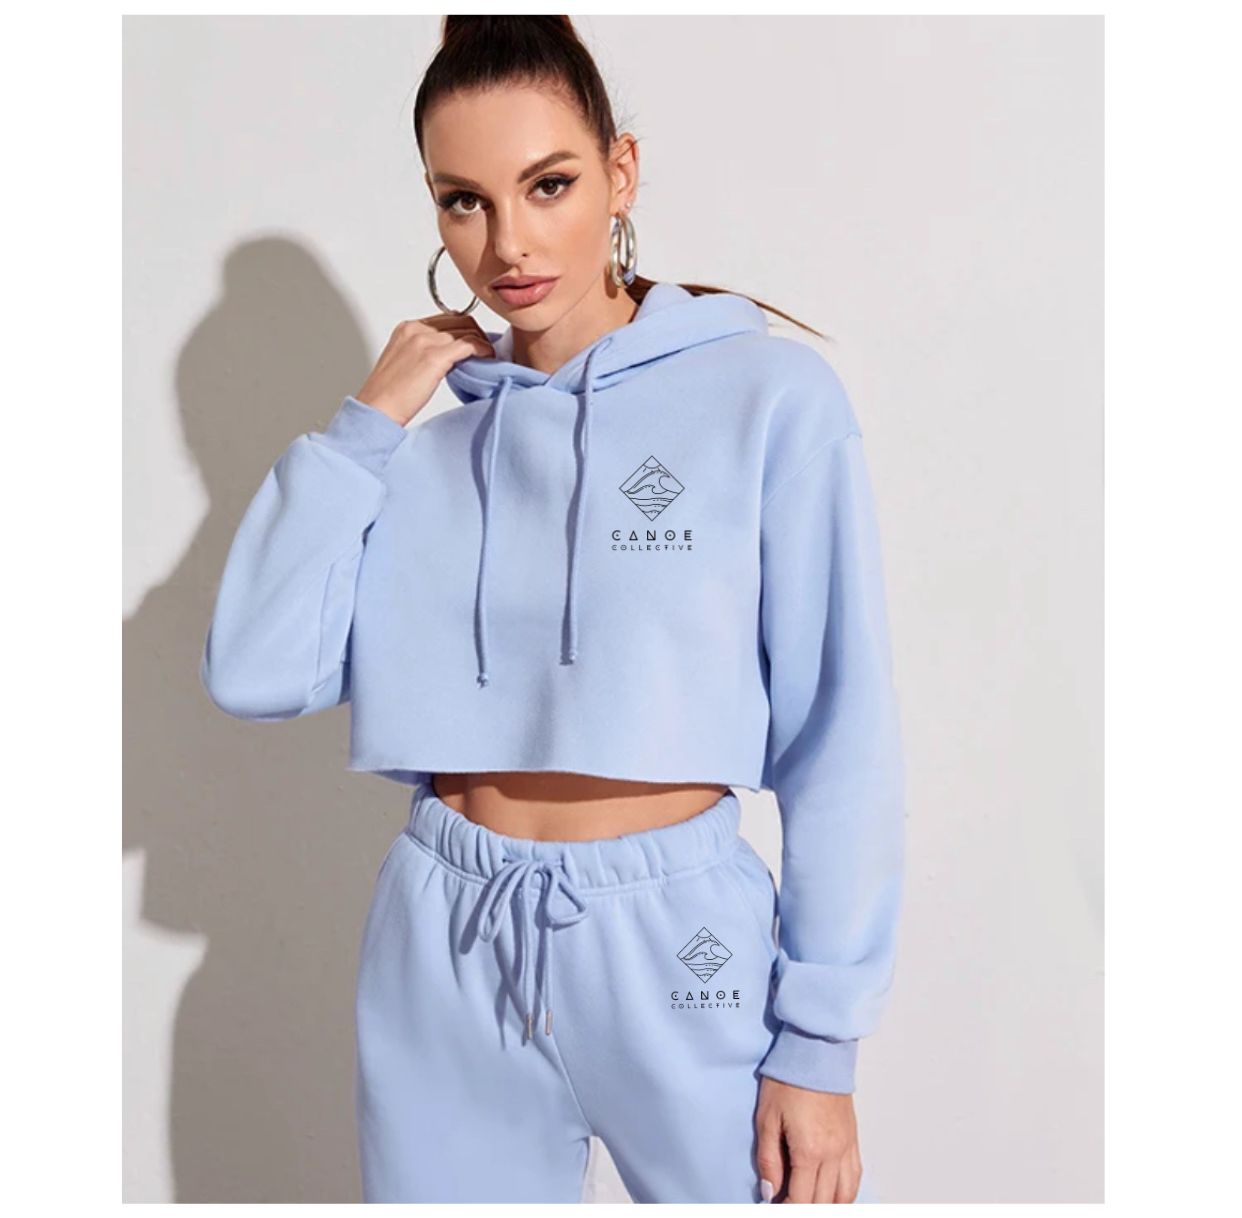 BC Chill Fleece Lined Crop